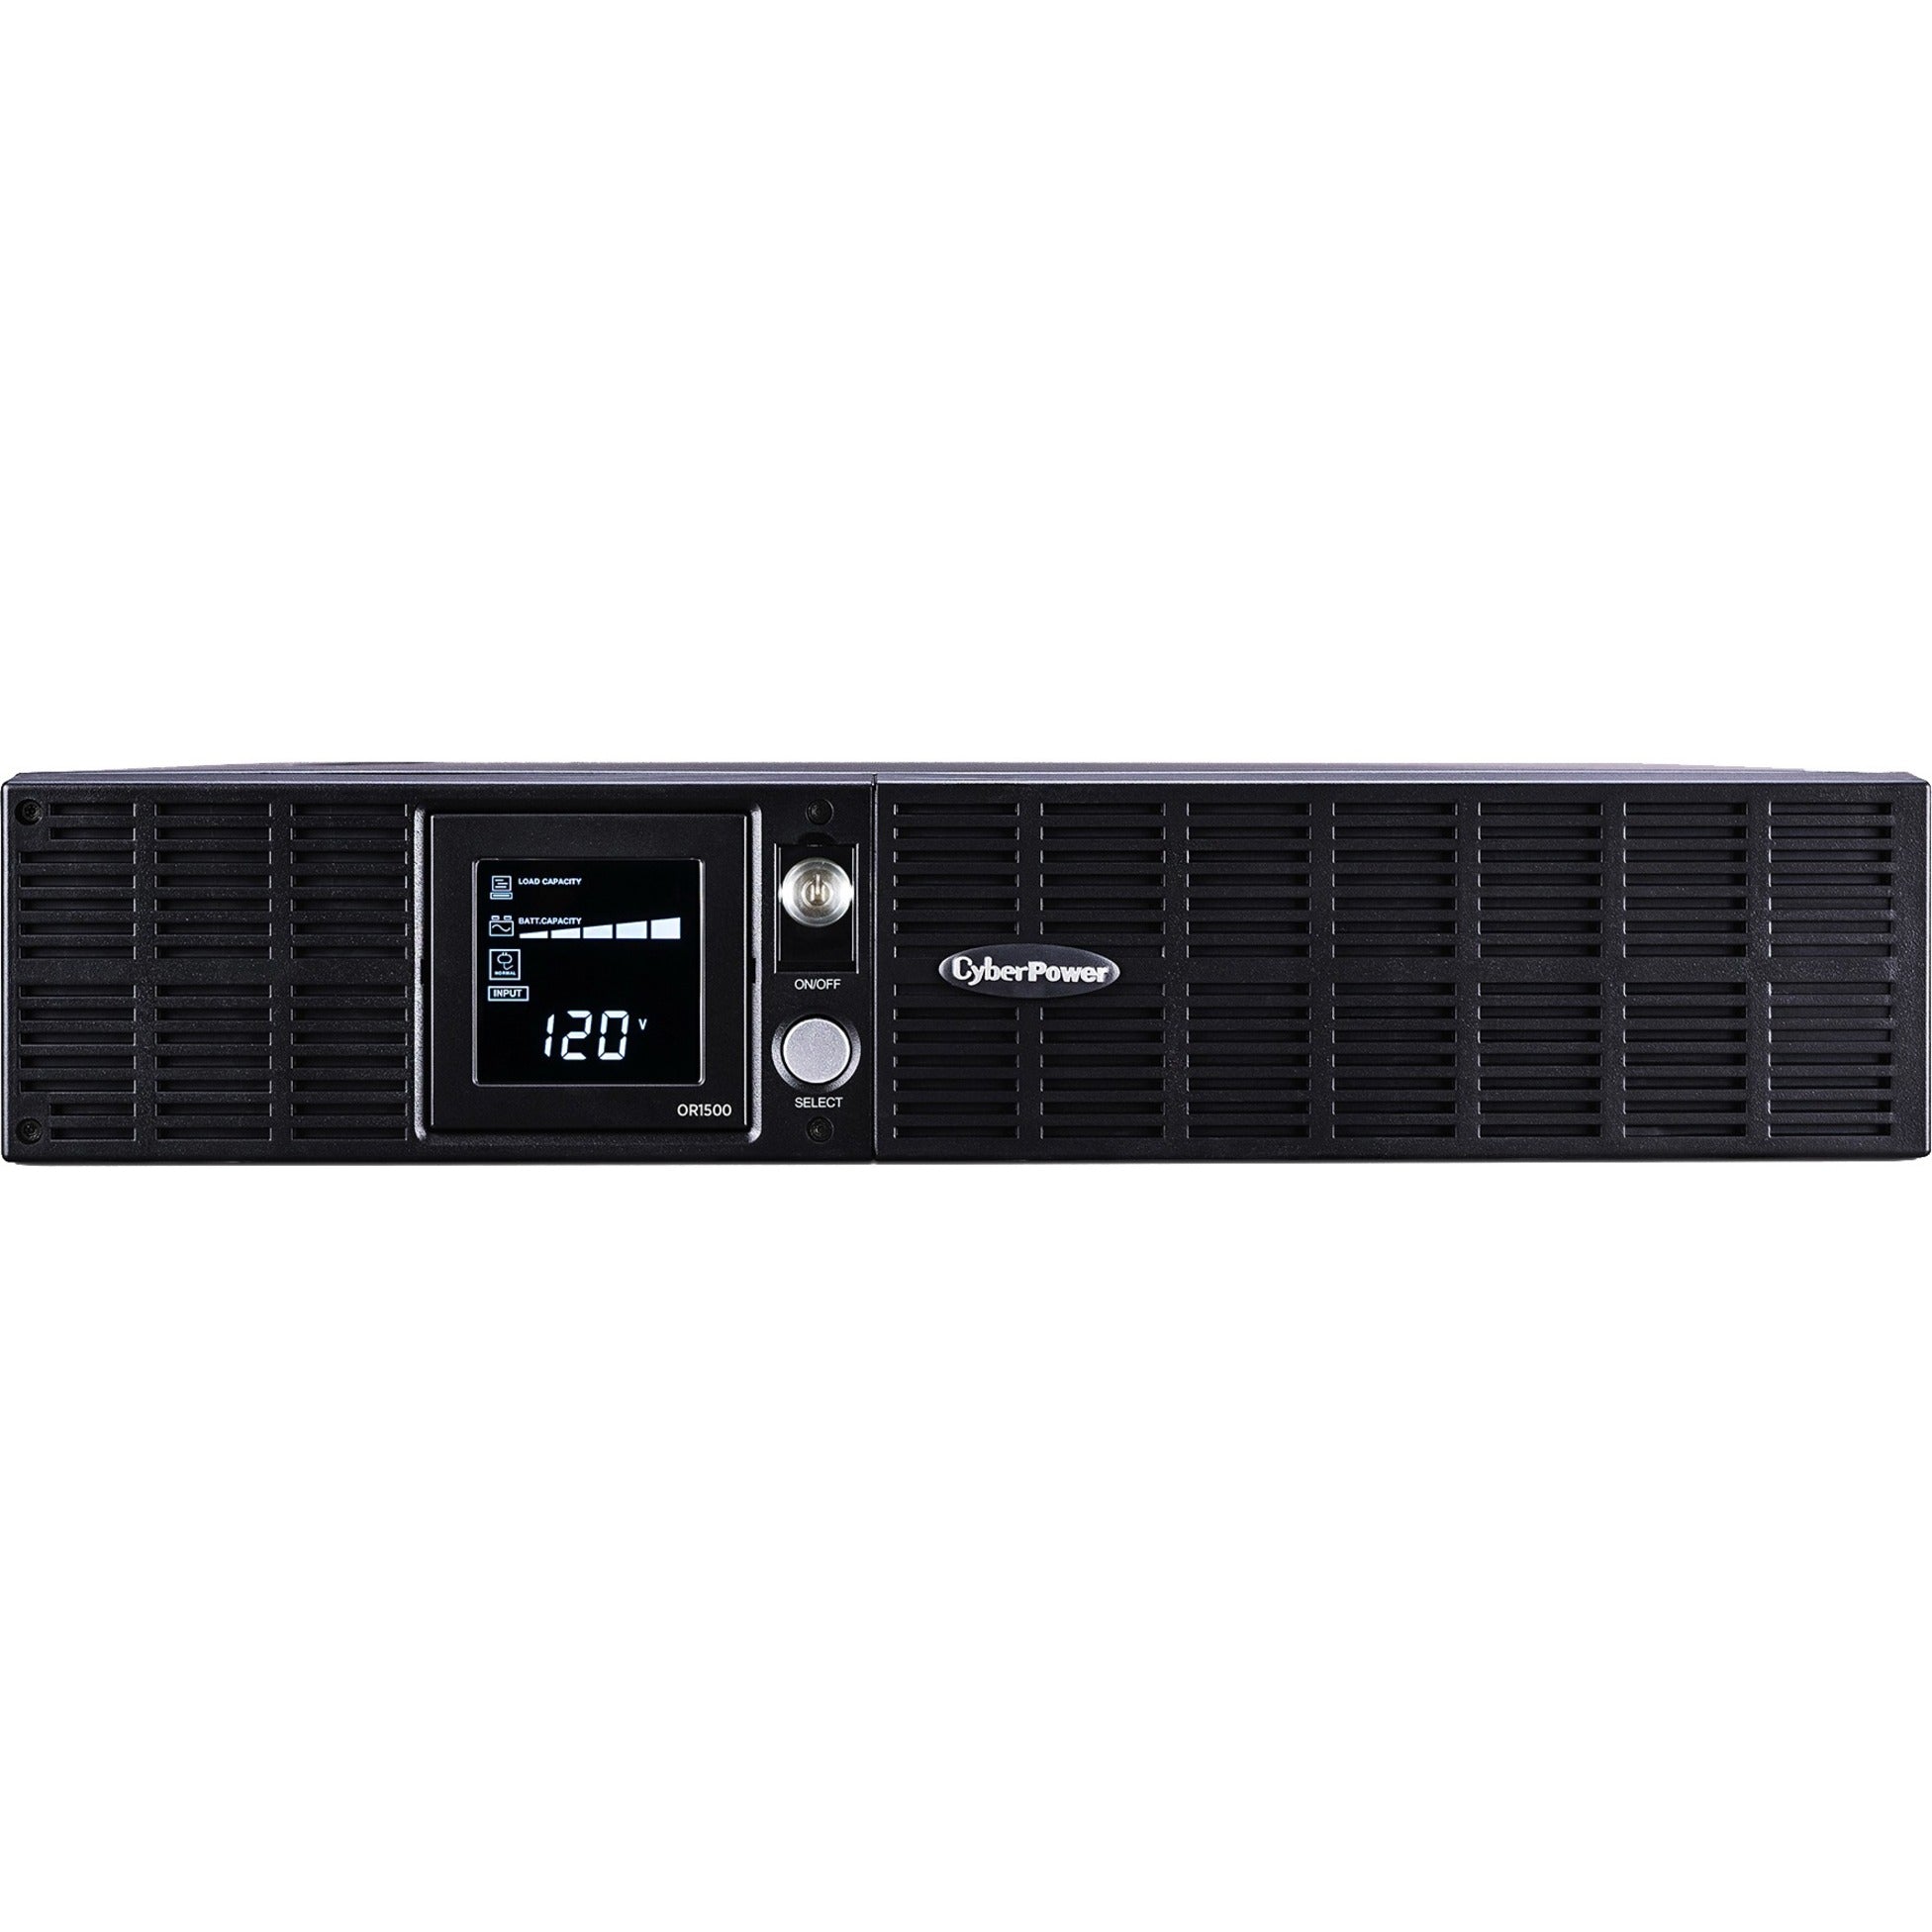 CyberPower OR1500LCDRT2U Smart App LCD UPS Systems, 1500VA, 8 Outlets, Energy Star Certified